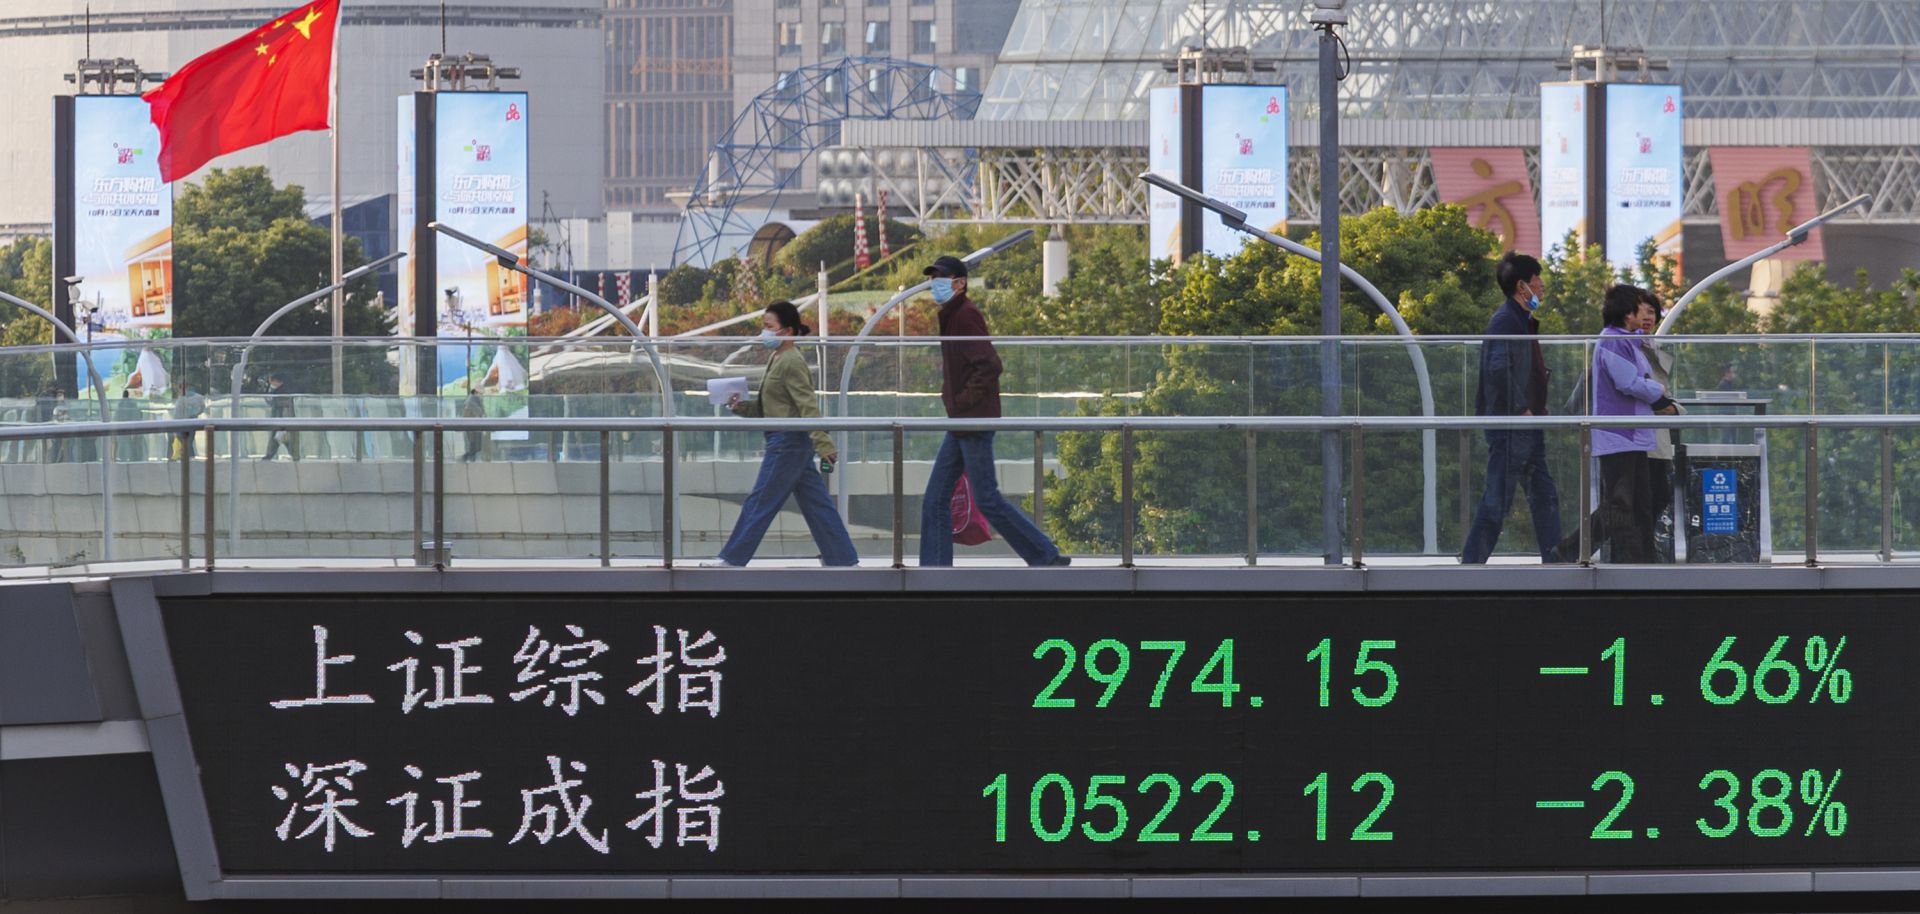 People walk on a pedestrian bridge that displays the numbers for the Shanghai Shenzhen stock indexes on Oct. 10, 2022, in Shanghai, China. 